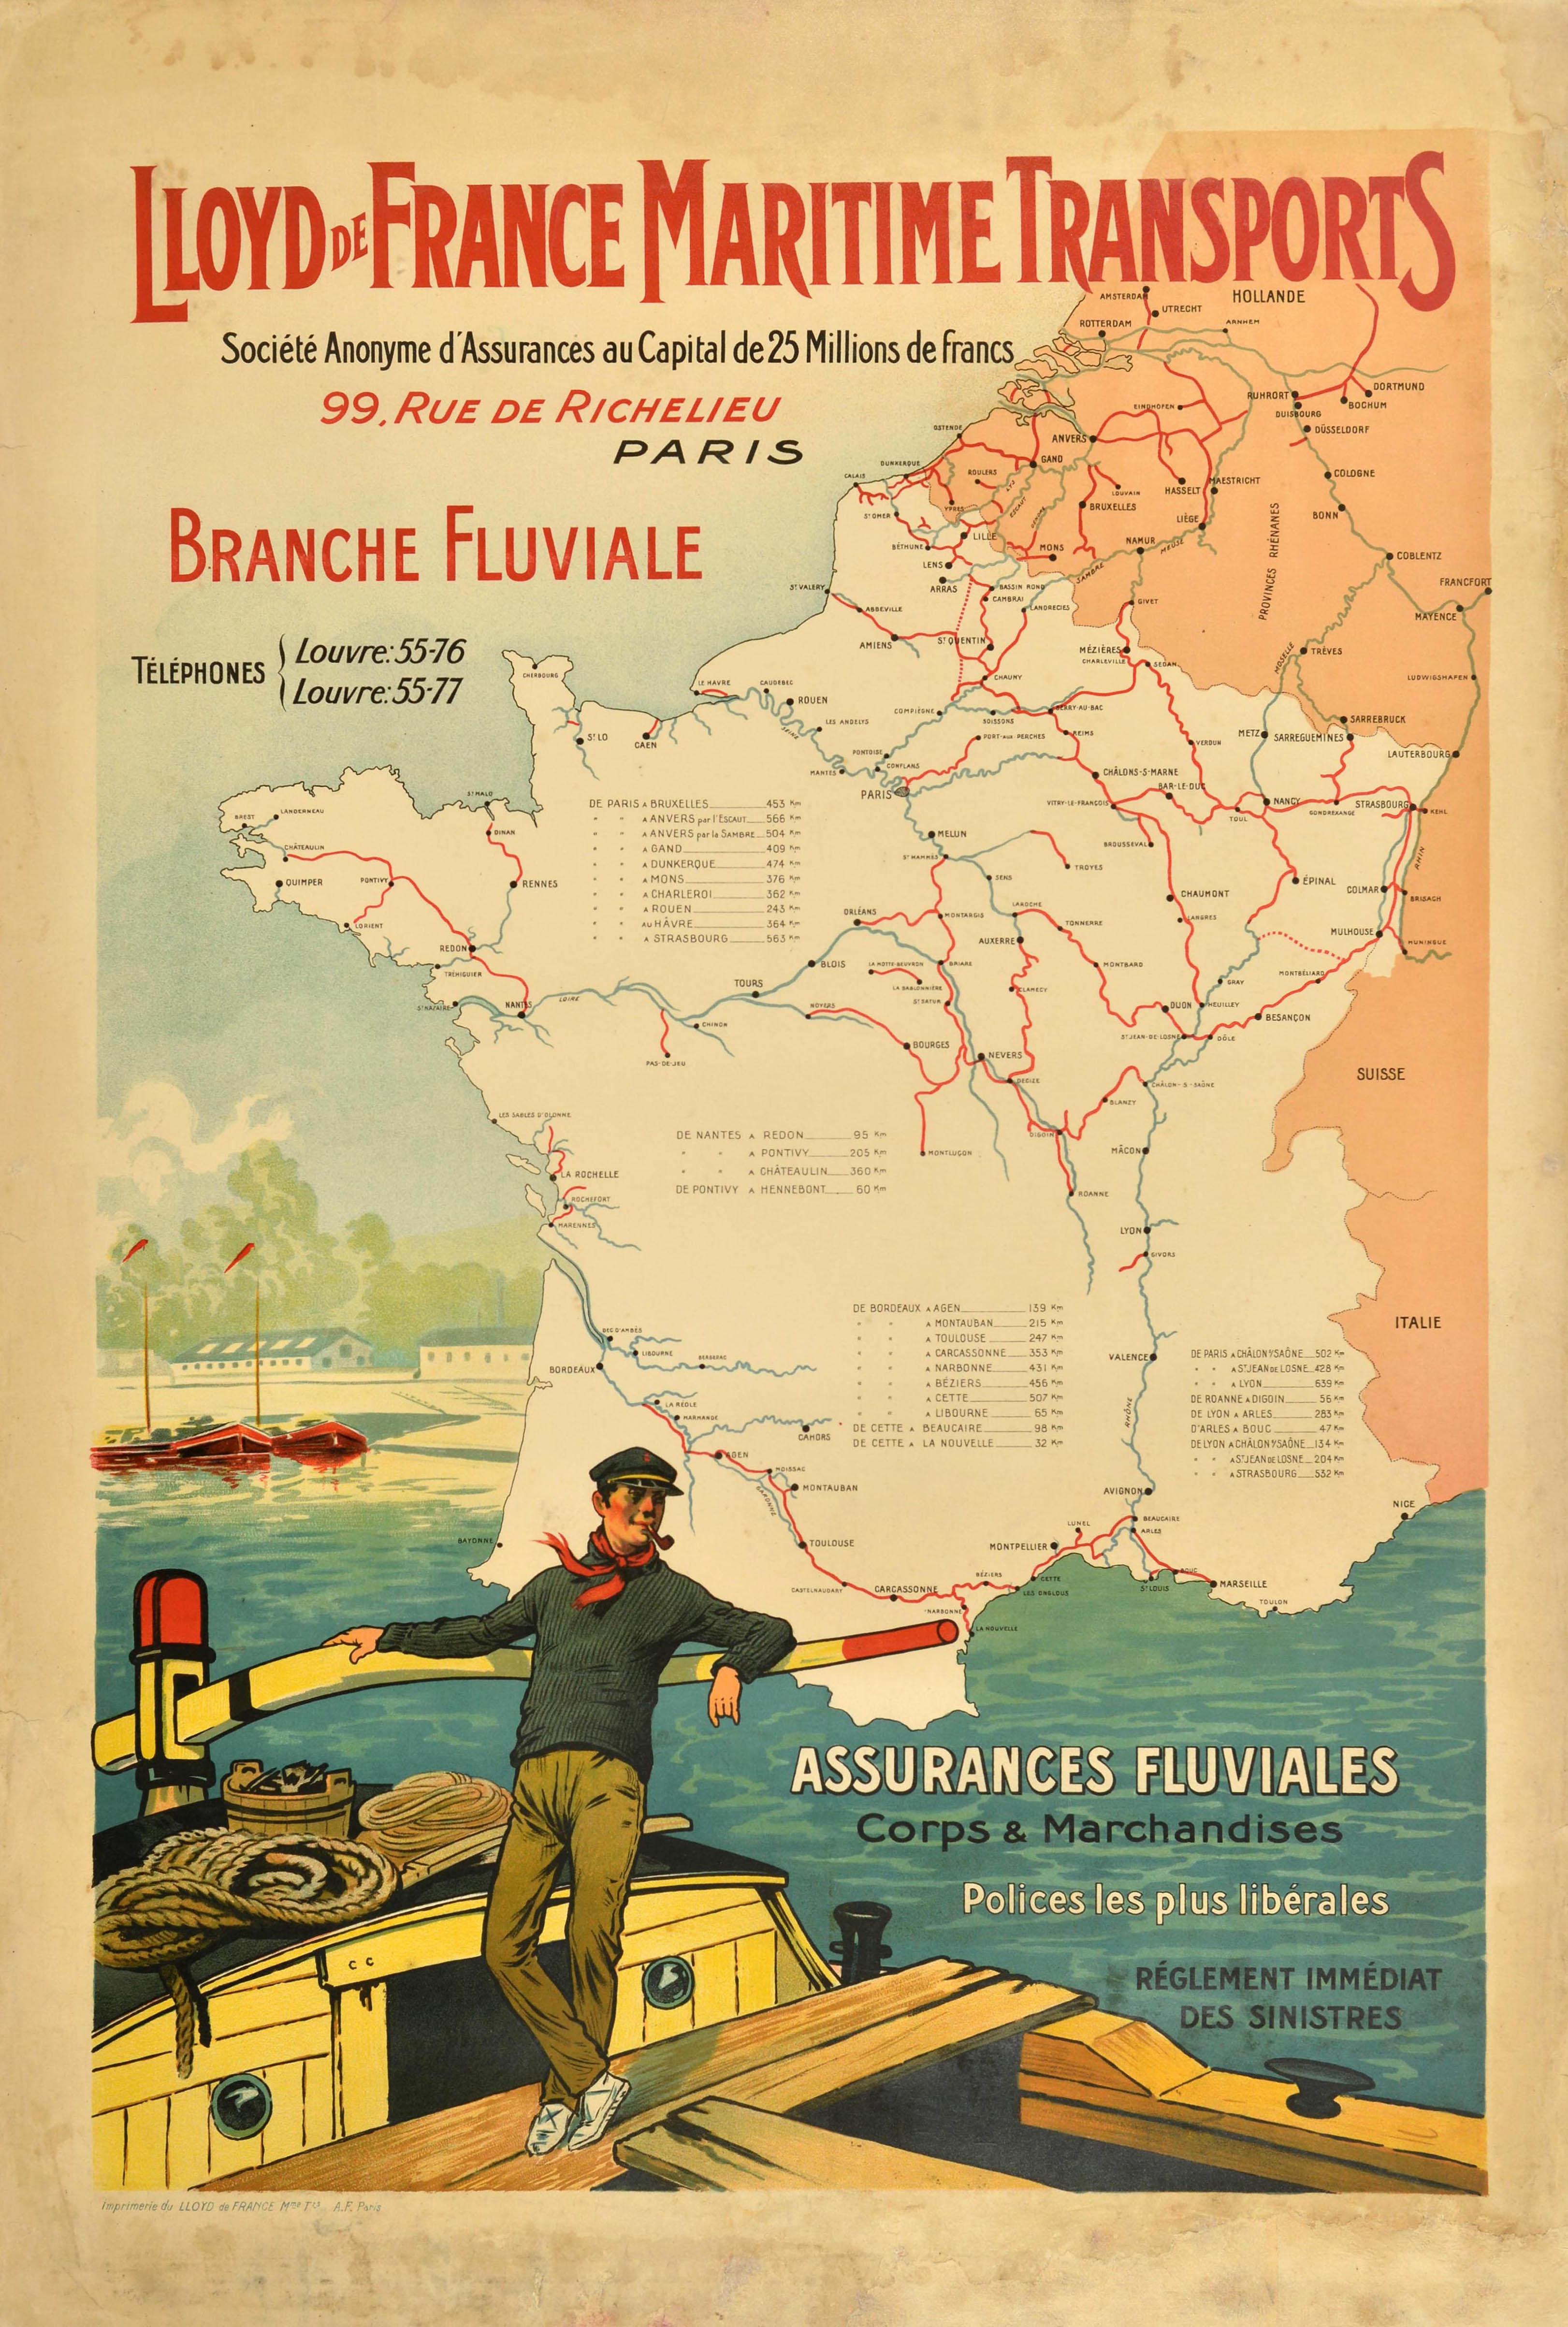 Unknown Print - Original Antique Advertising Poster Lloyds France Maritime Transports Insurance